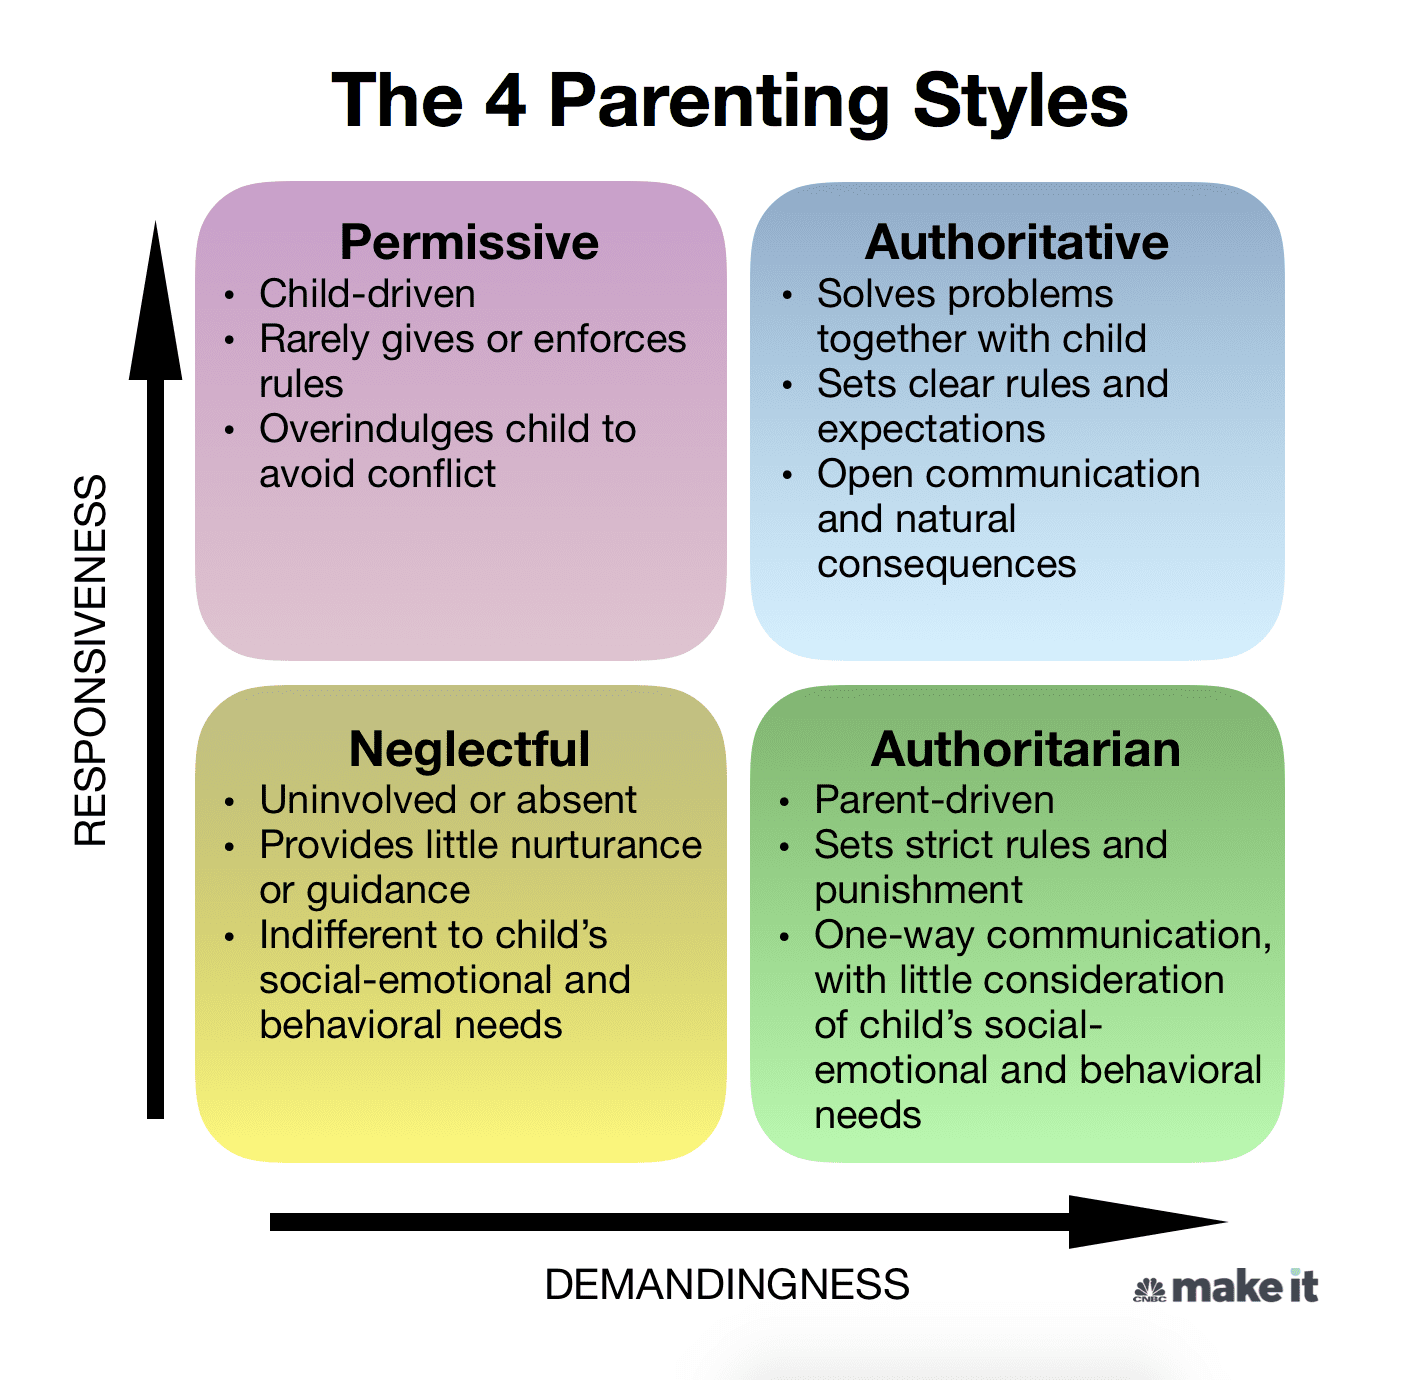 The 4 parenting styles